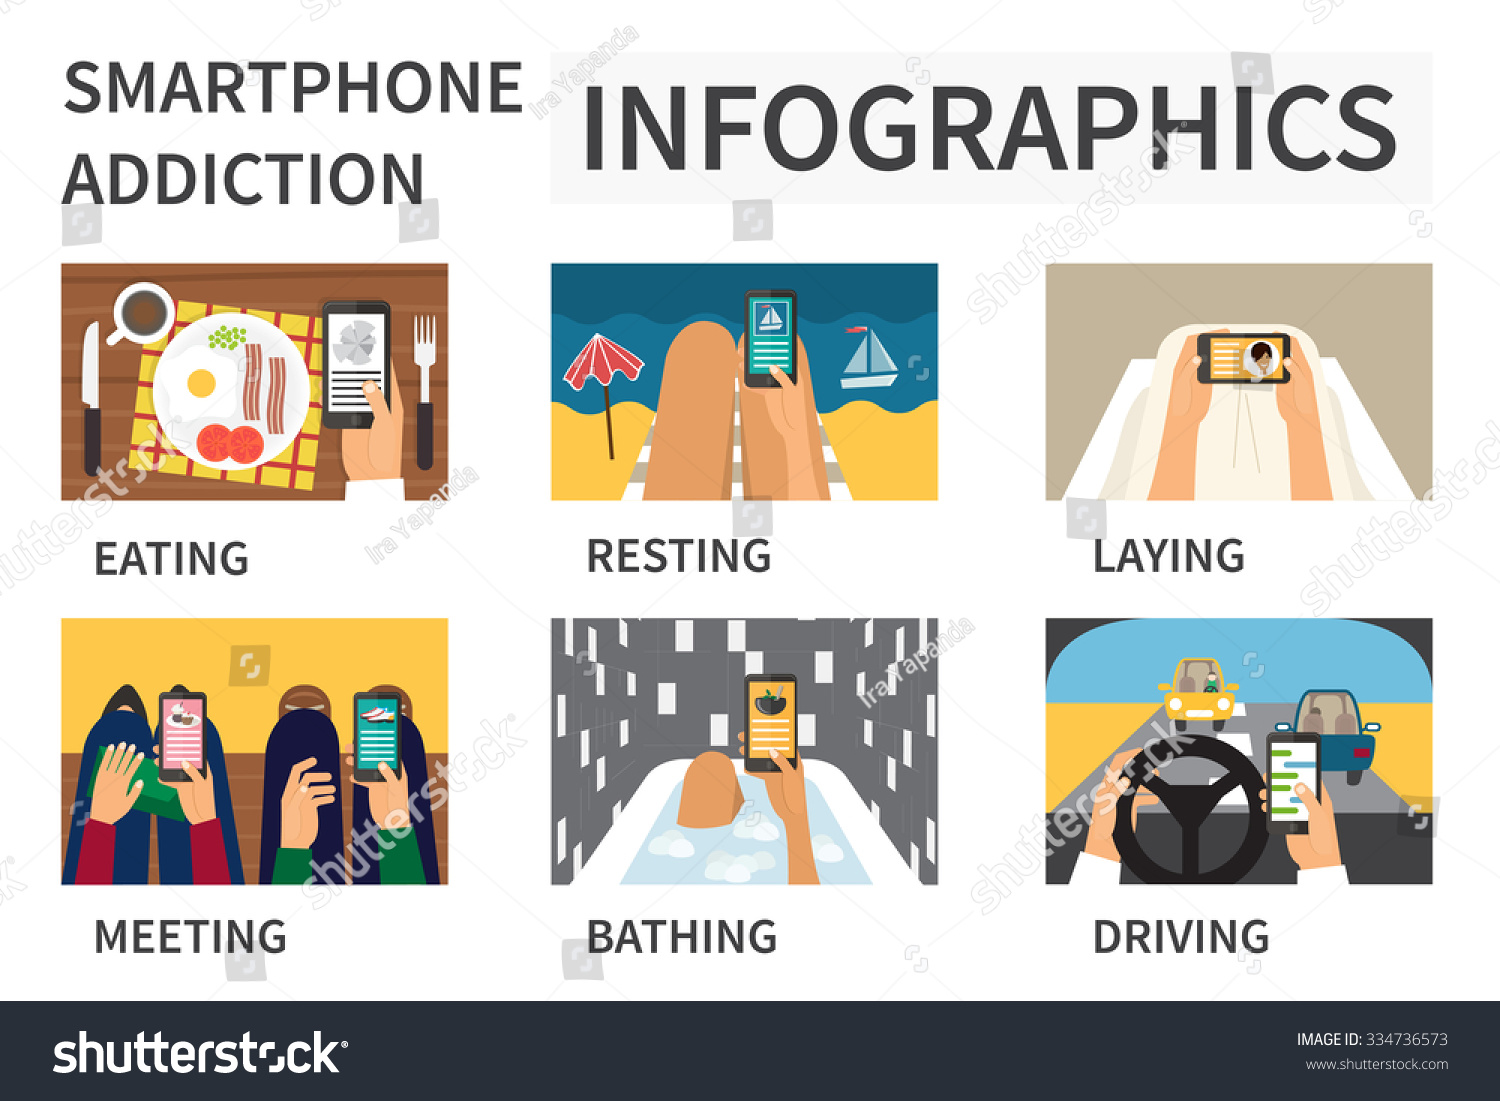 Smartphone Addiction Infographic People Using Mobile Stock Vector